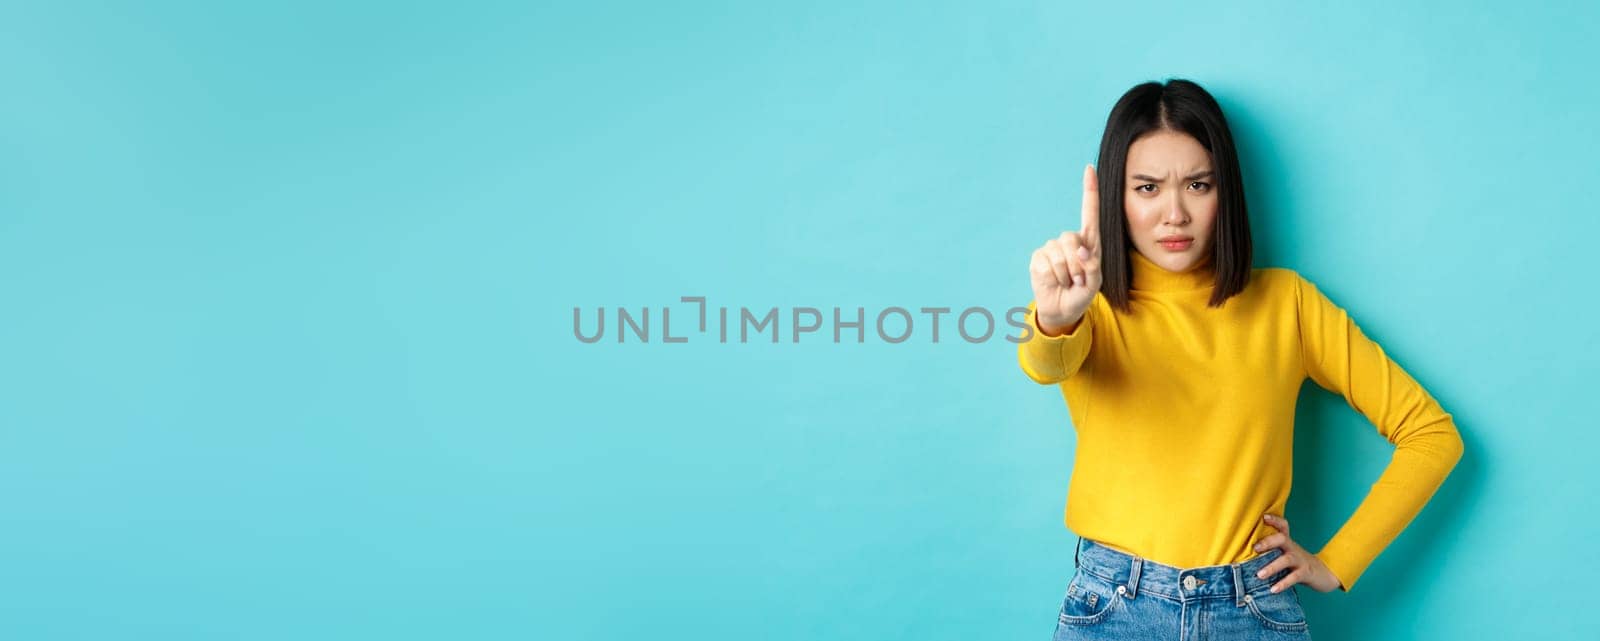 Confident and serious woman tell no, showing extended finger to stop and prohibit something bad, frowning and looking at camera self-assured, standing over blue background.